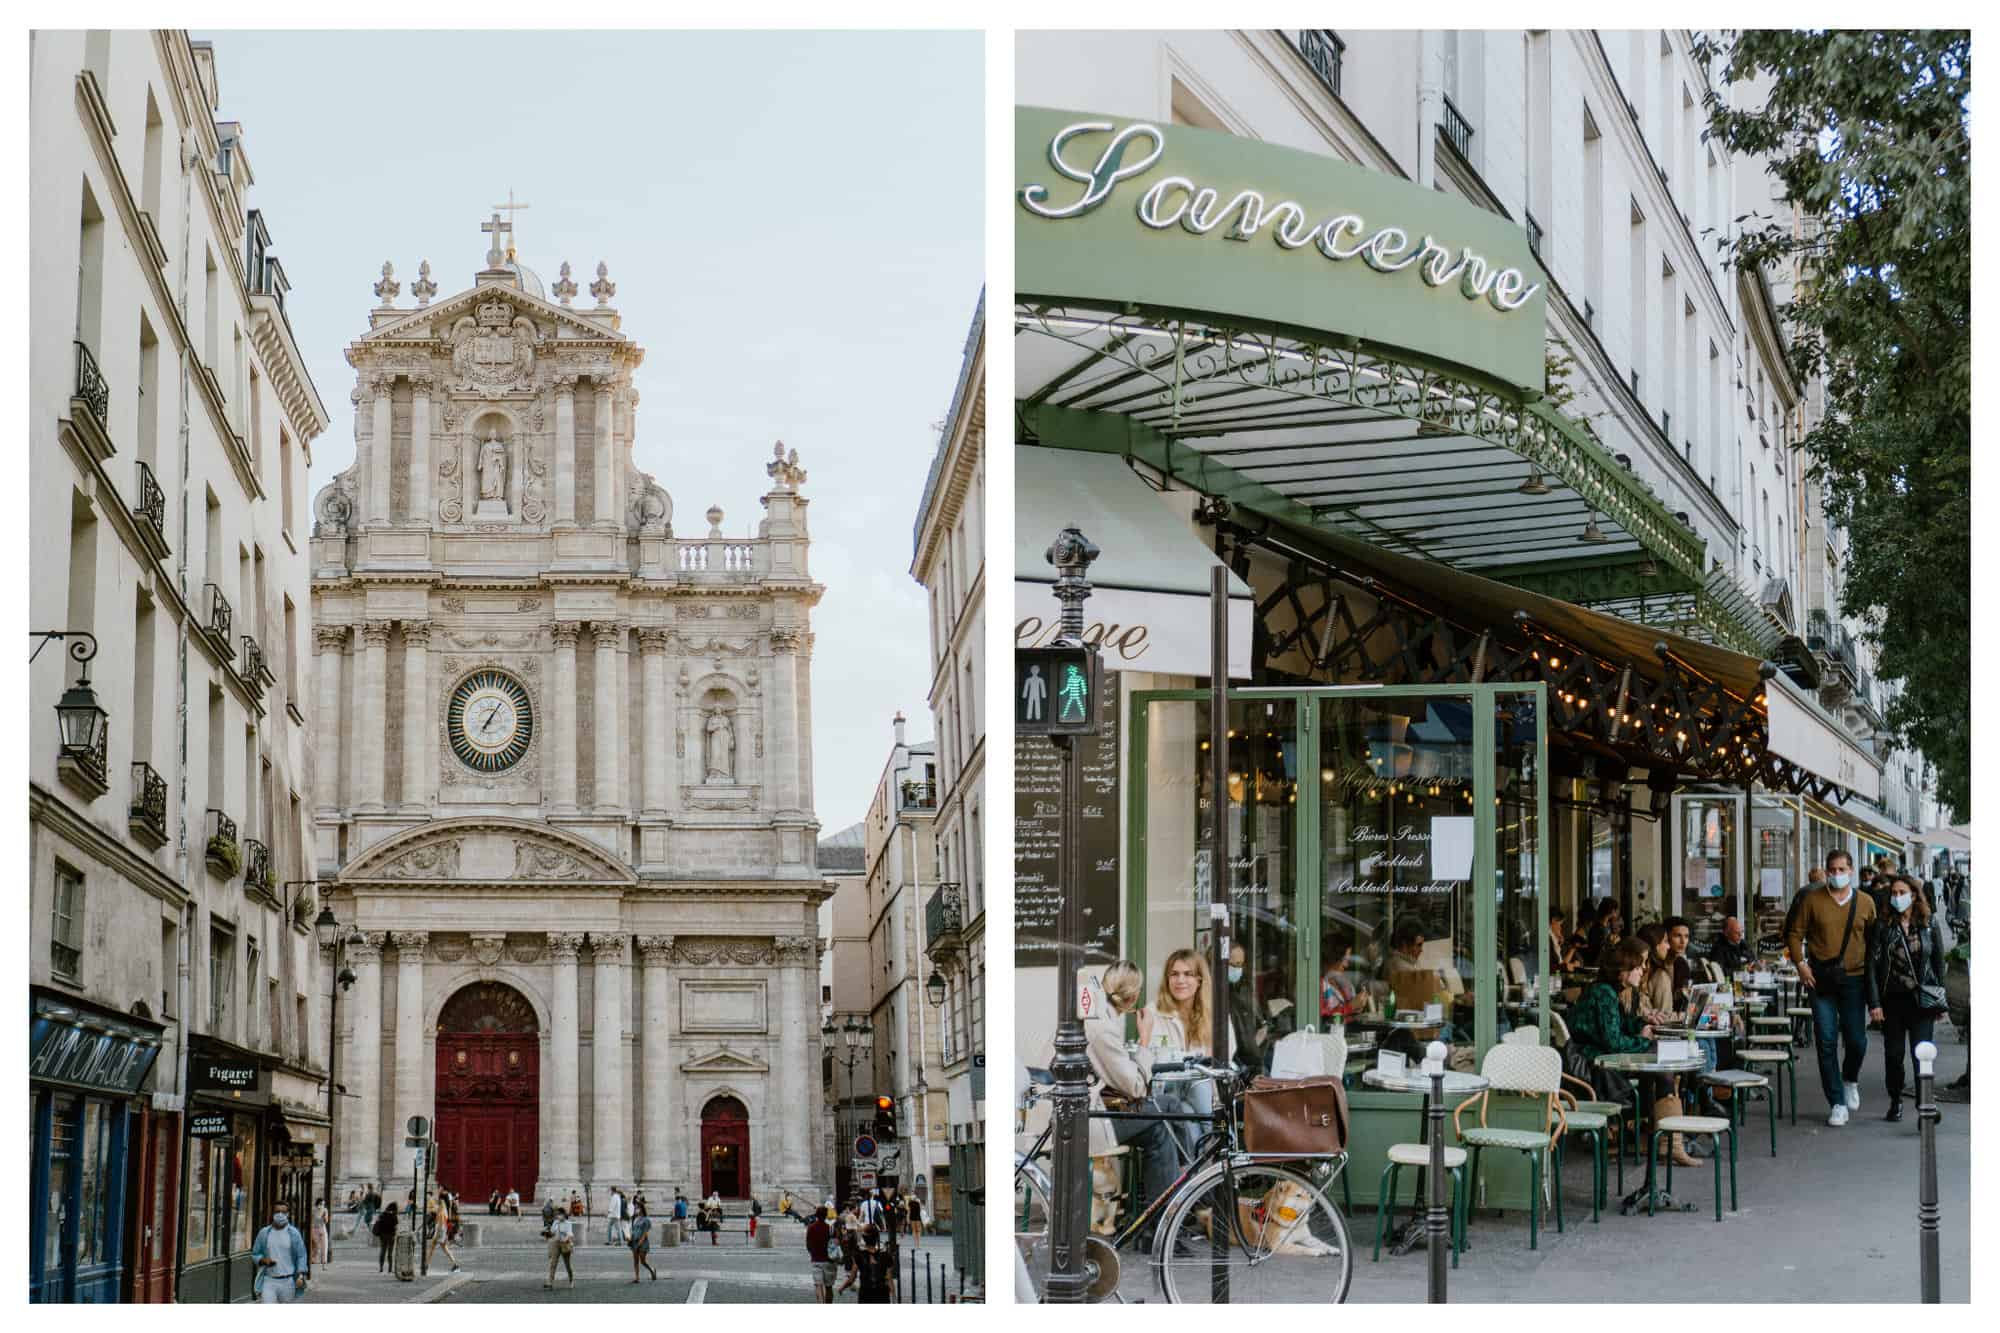 Left: a large church in Paris. The church is nestled in amongst other buildings. All of the buildings and the church are cream colored. The church has a large red door. Right: A café in Paris called "Le Sancerre." The word "Sancerre" is visible on a large green awning. There are several people sitting at tables and chairs outside. There are leaves from trees visible to the right.